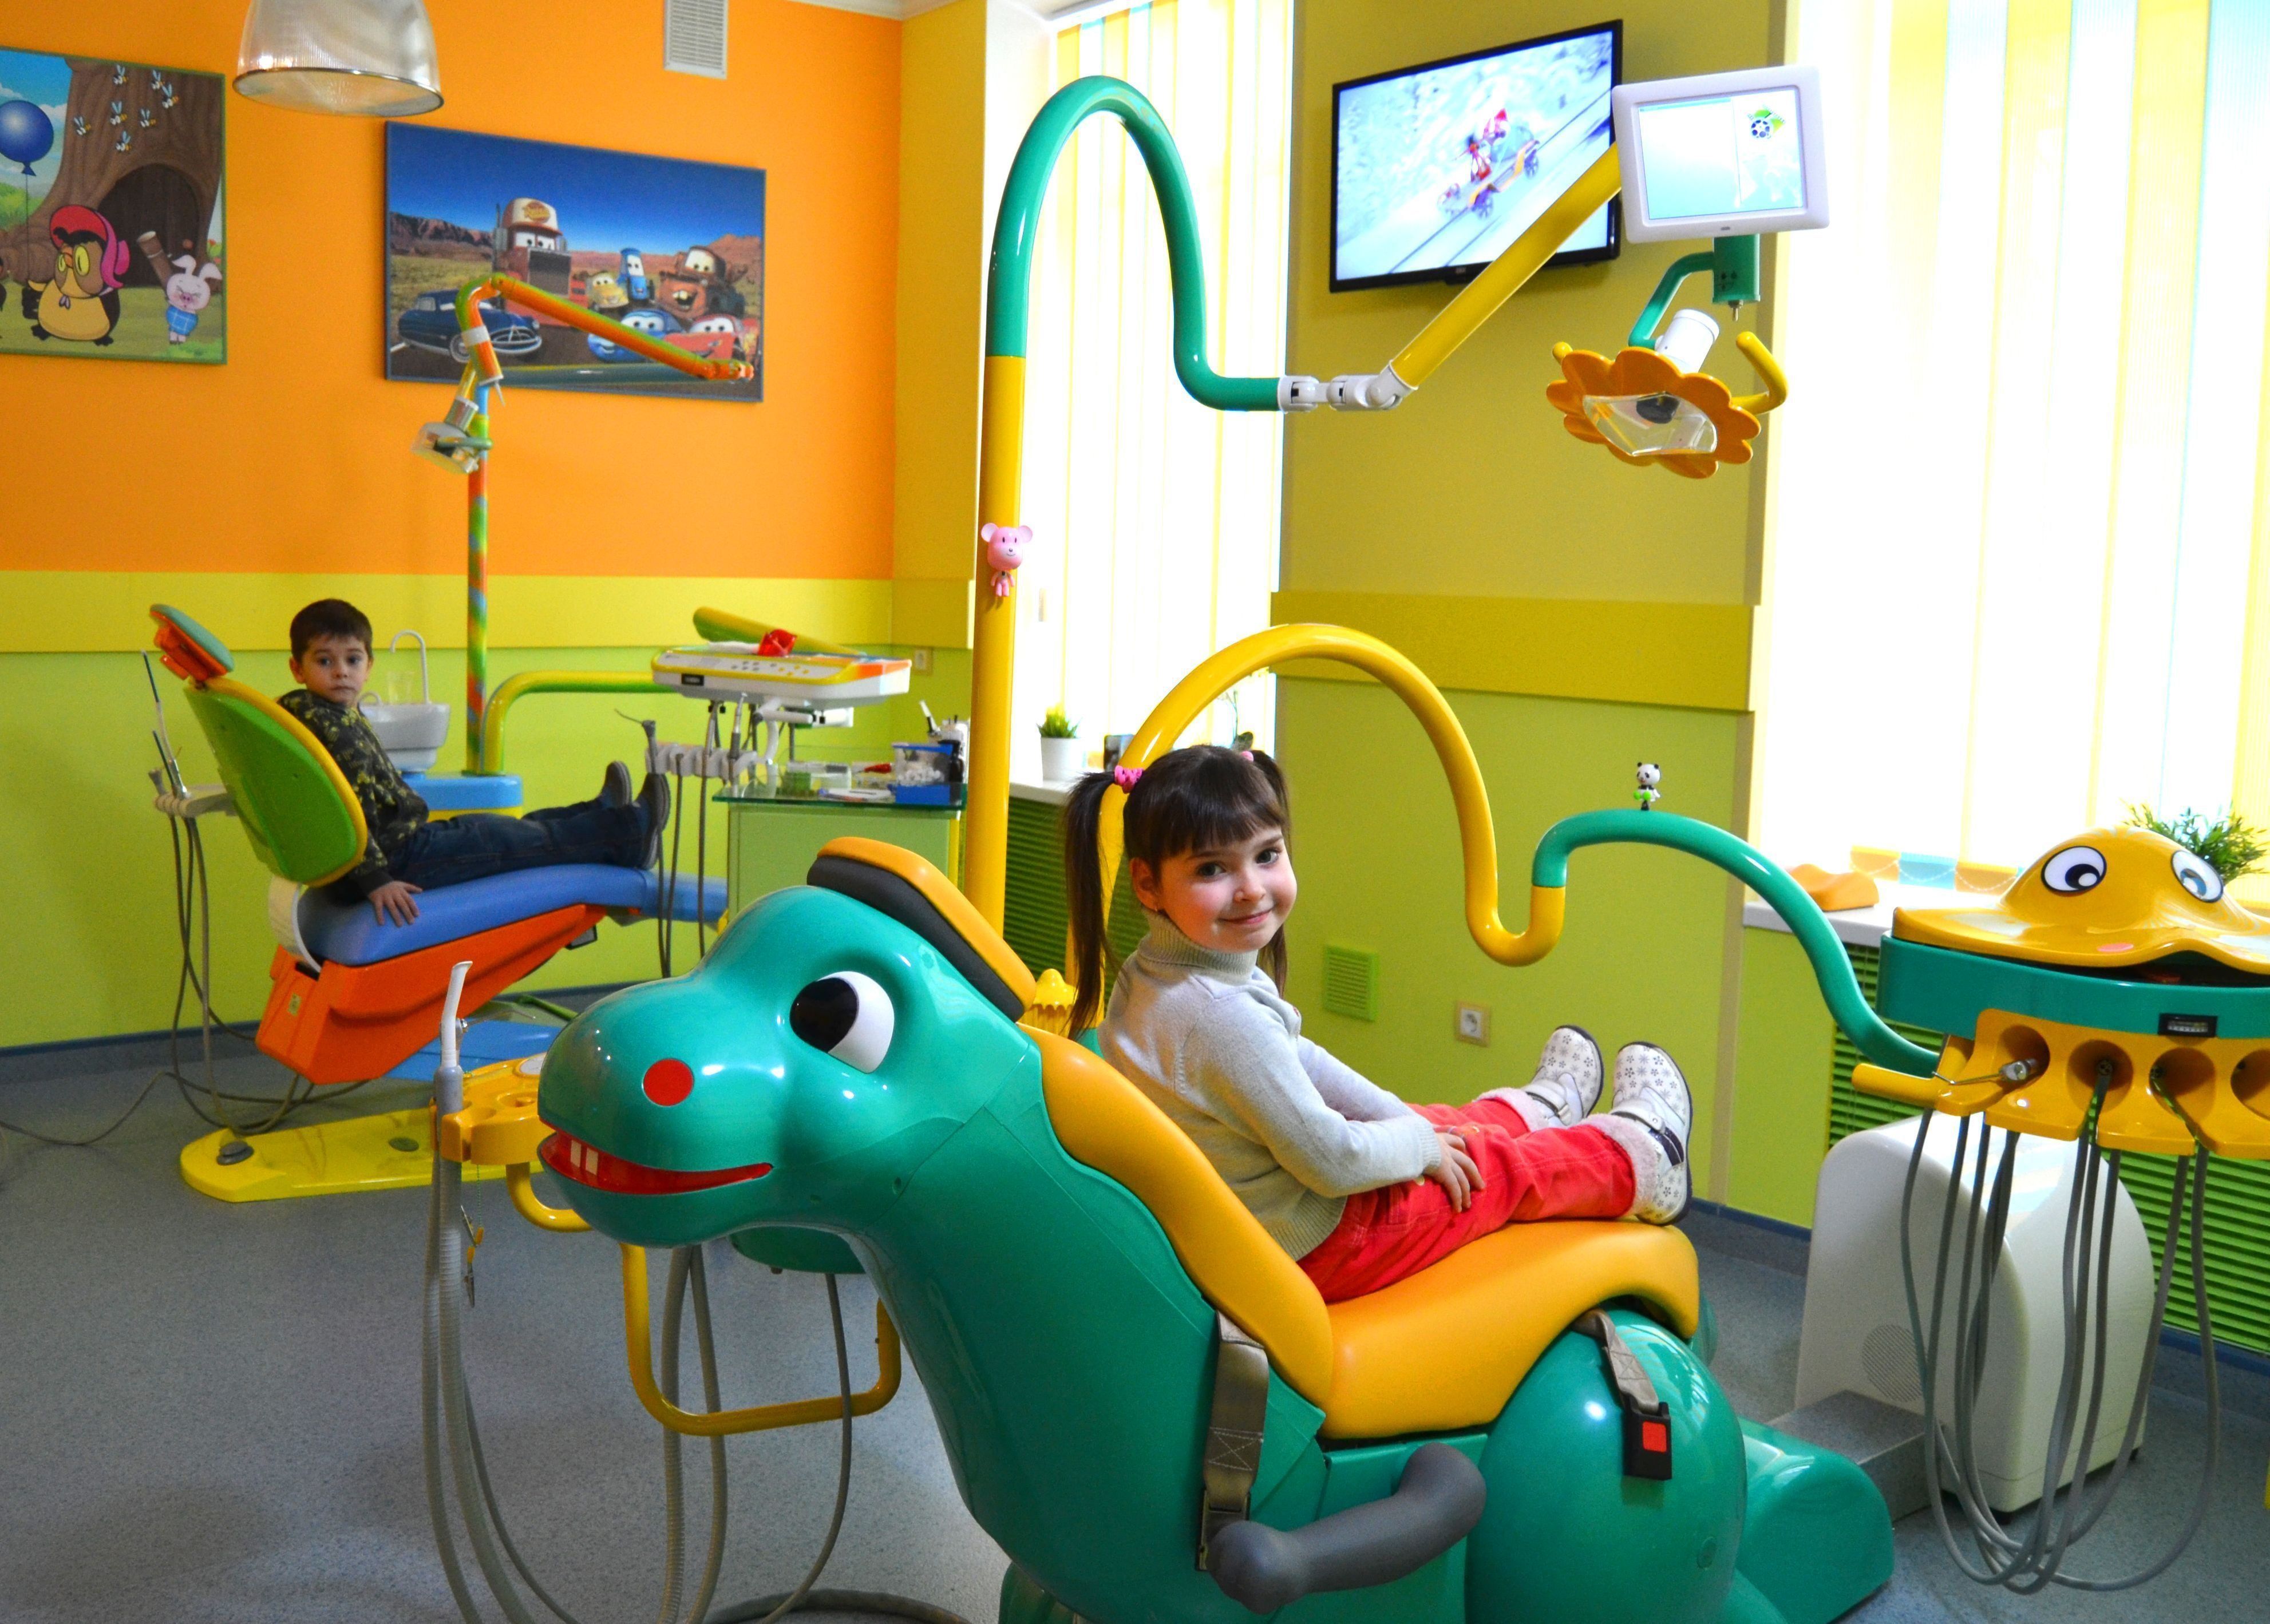 The best paid dental clinics for children in Novosibirsk in 2020